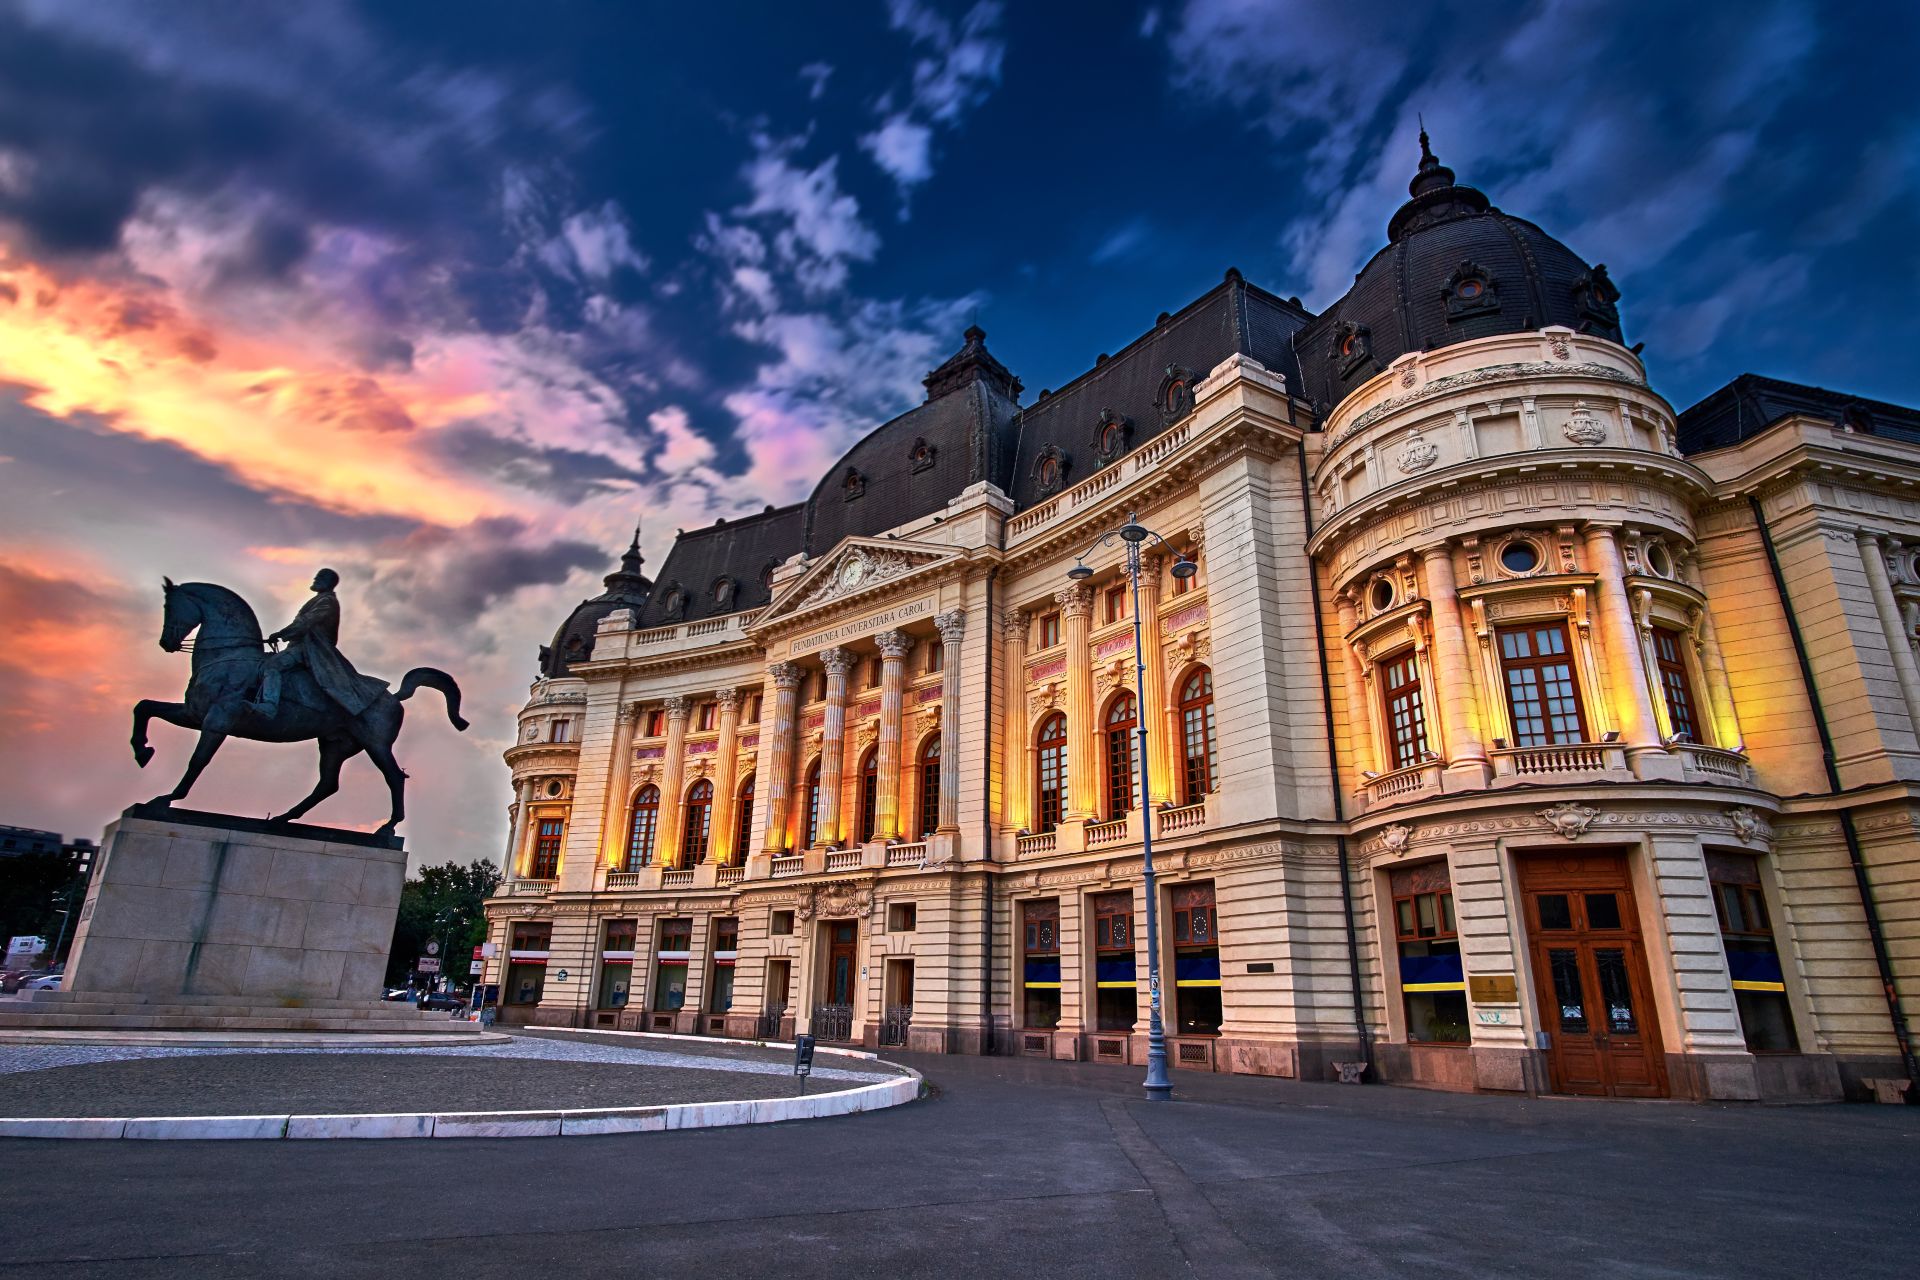 Bucharest at sunset. Calea Victoriei, National Library